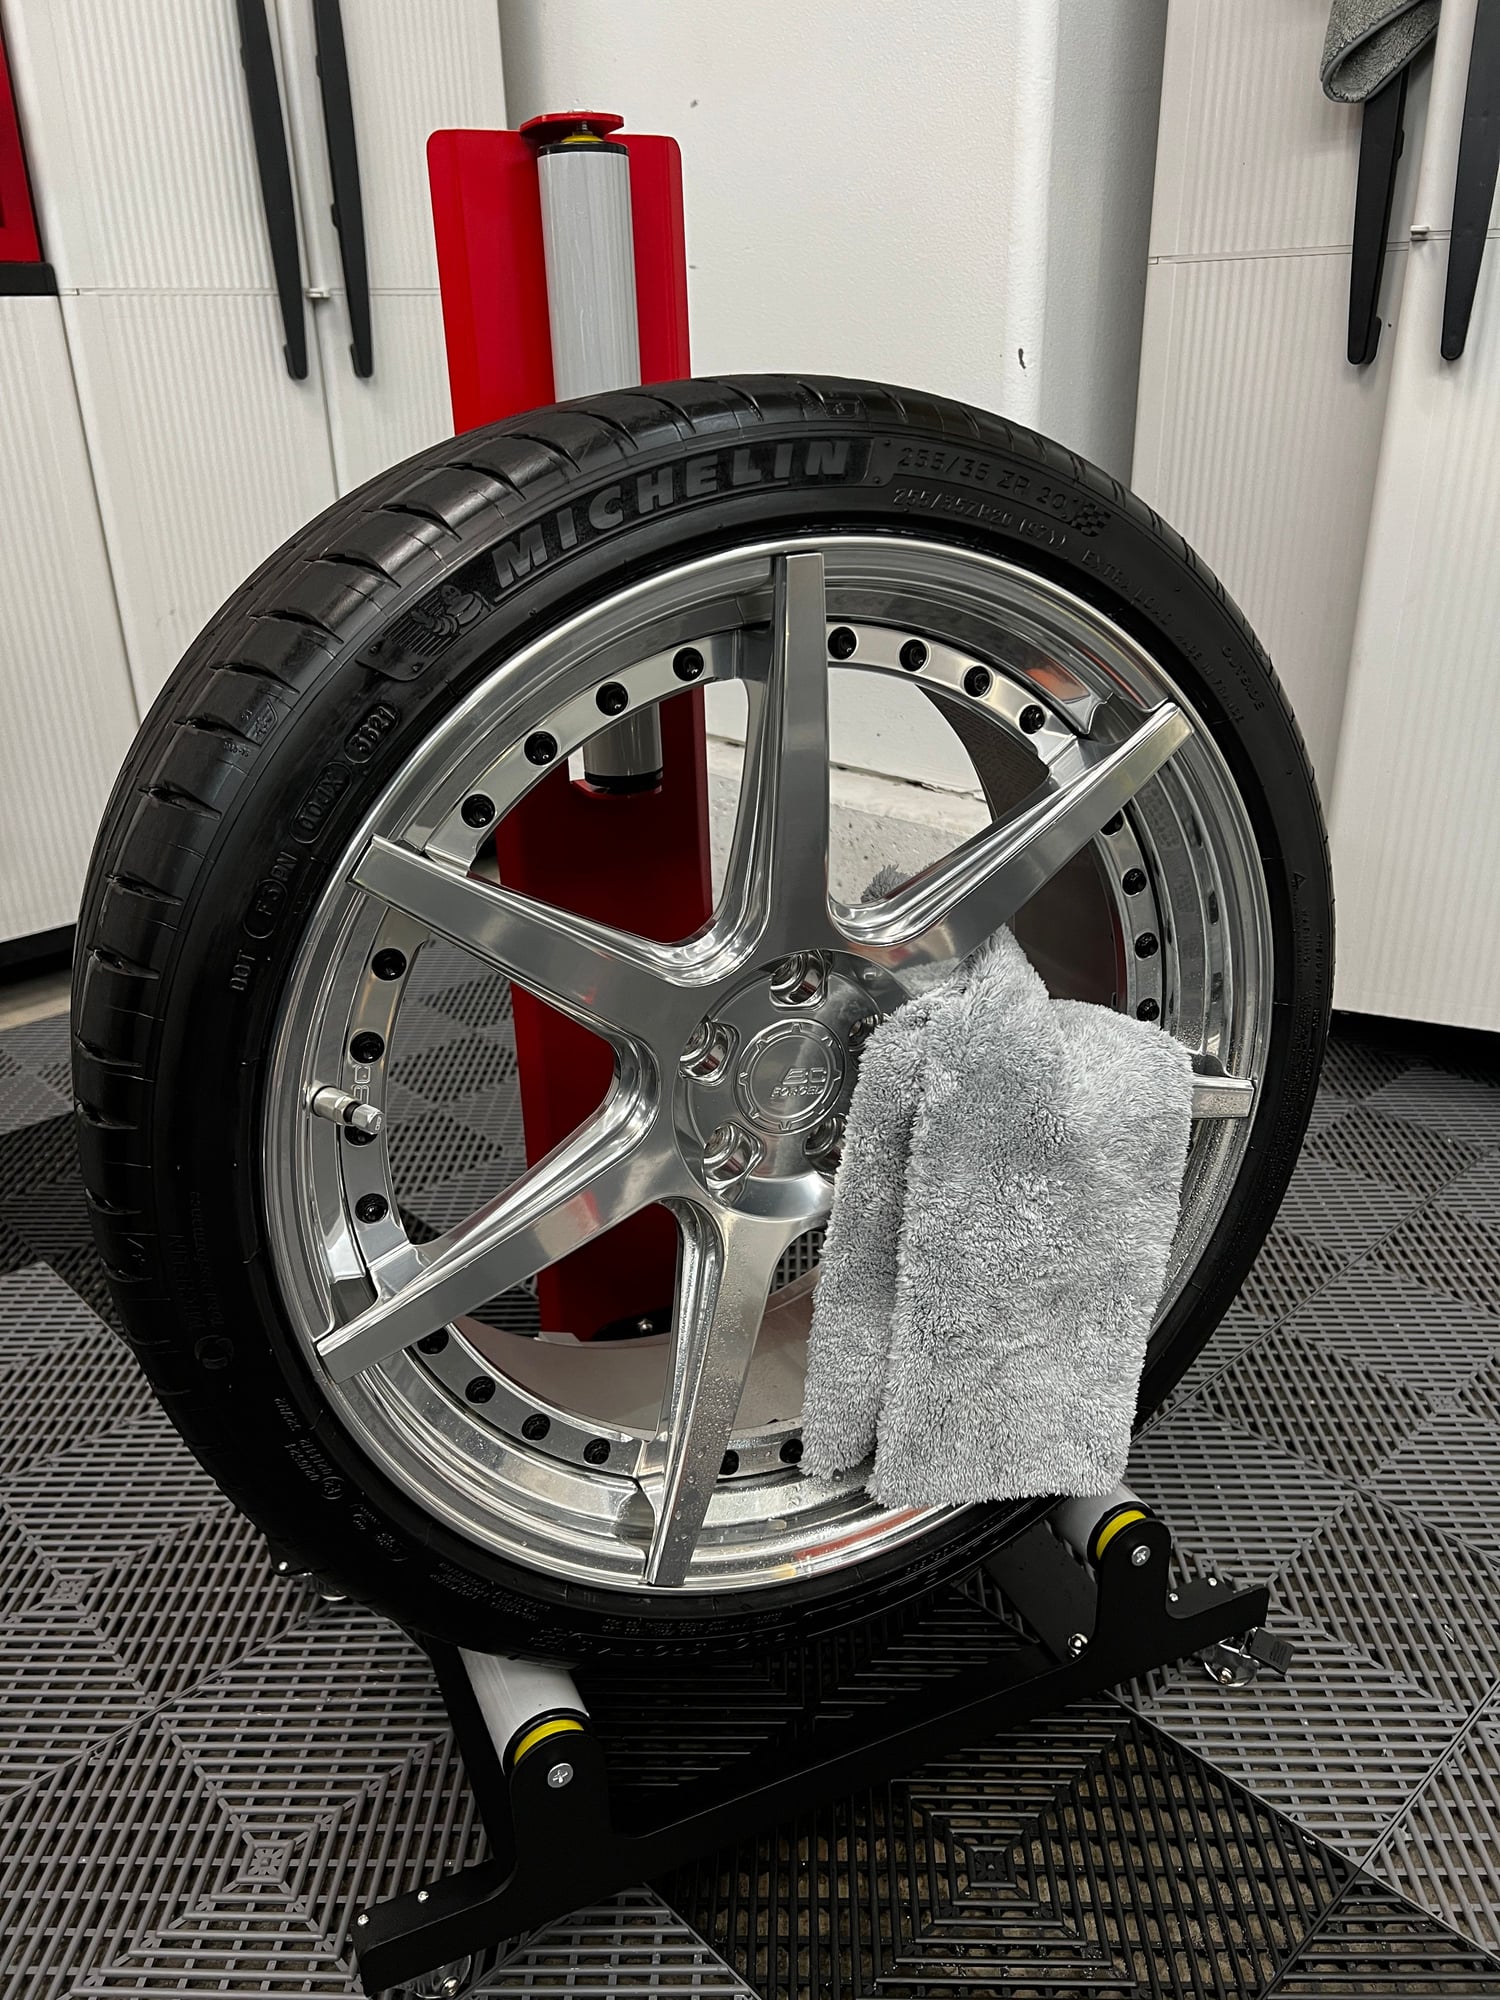 Wheels and Tires/Axles - Wheel & Tire Car Detailing Stand for Cleaning, Detailing, and Polishing - New - 0  All Models - Pleasanton, CA 94566, United States